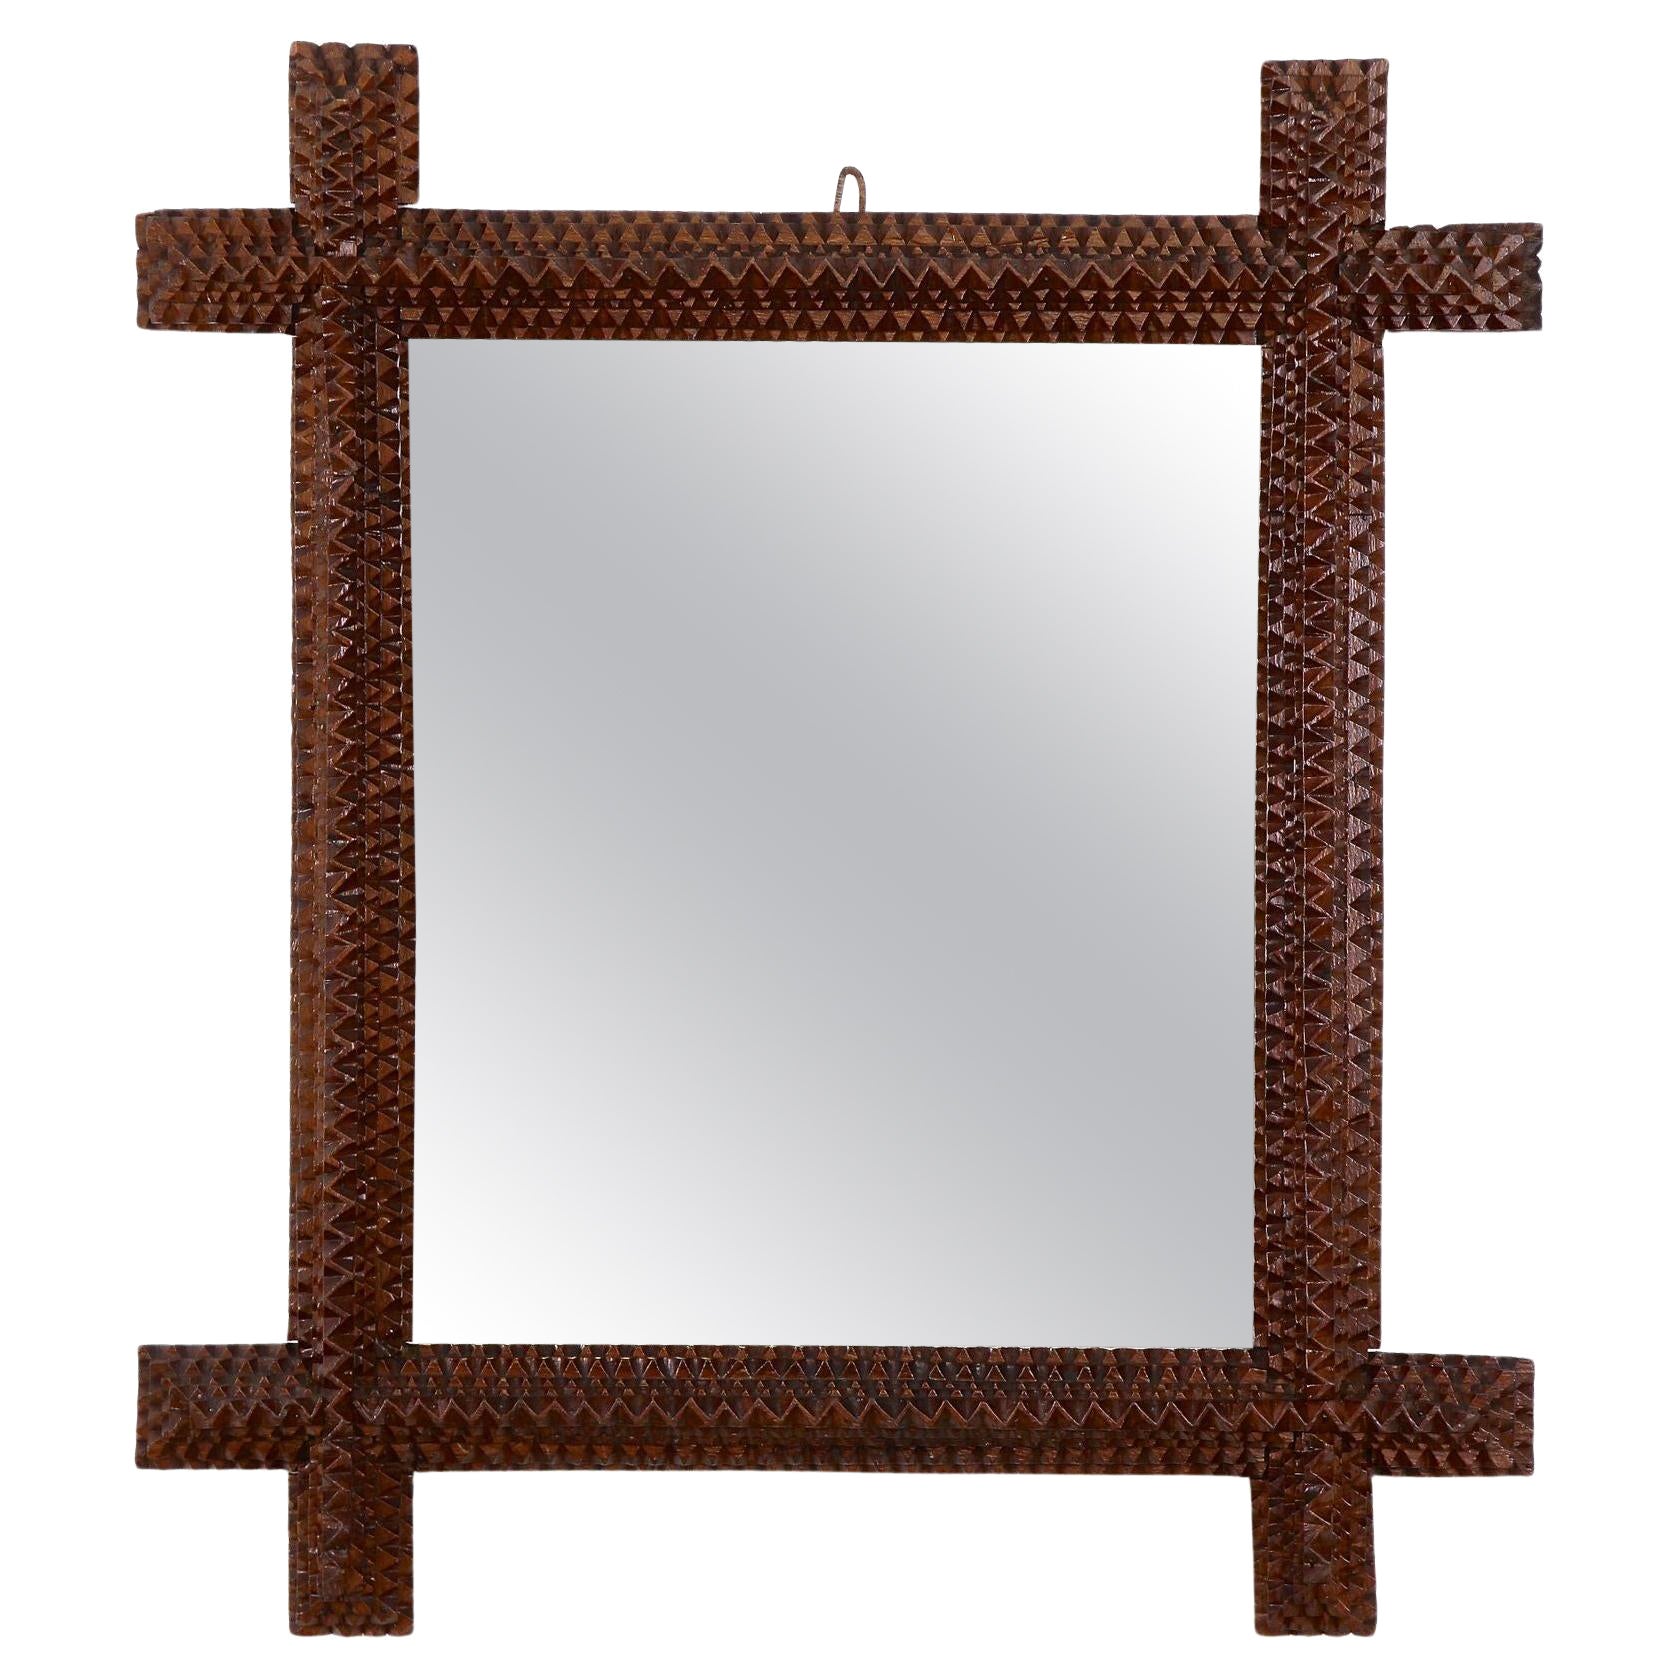 Rustic Tramp Art Wall Mirror with Chip Carvings, Austria circa 1880 For Sale